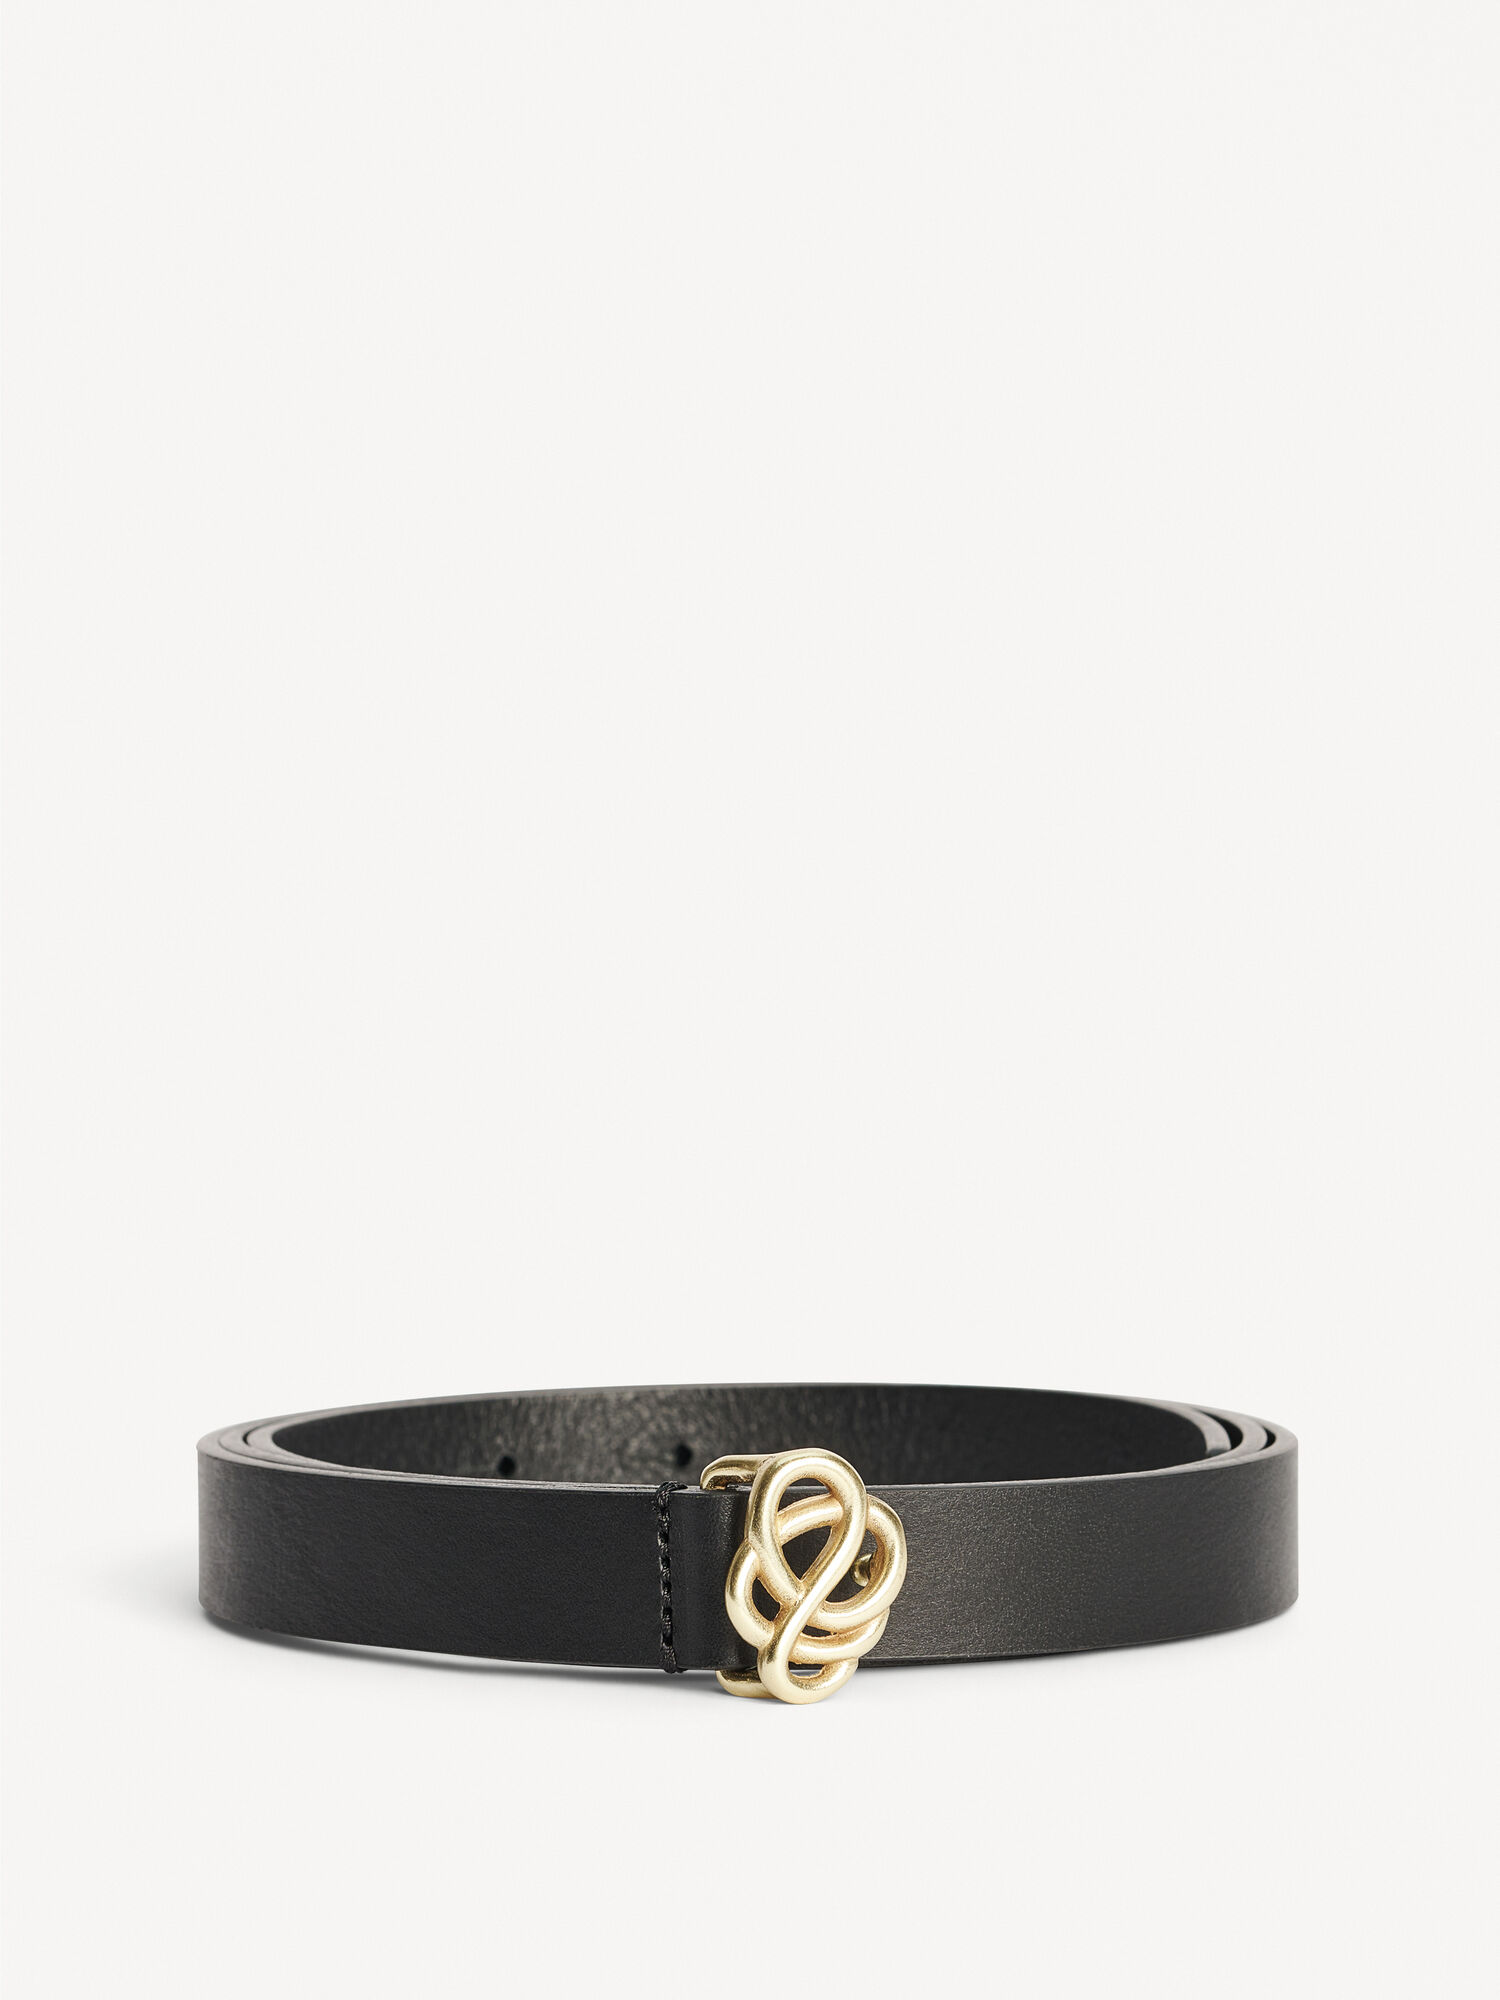 Belts | See all styles here | By Malene Birger